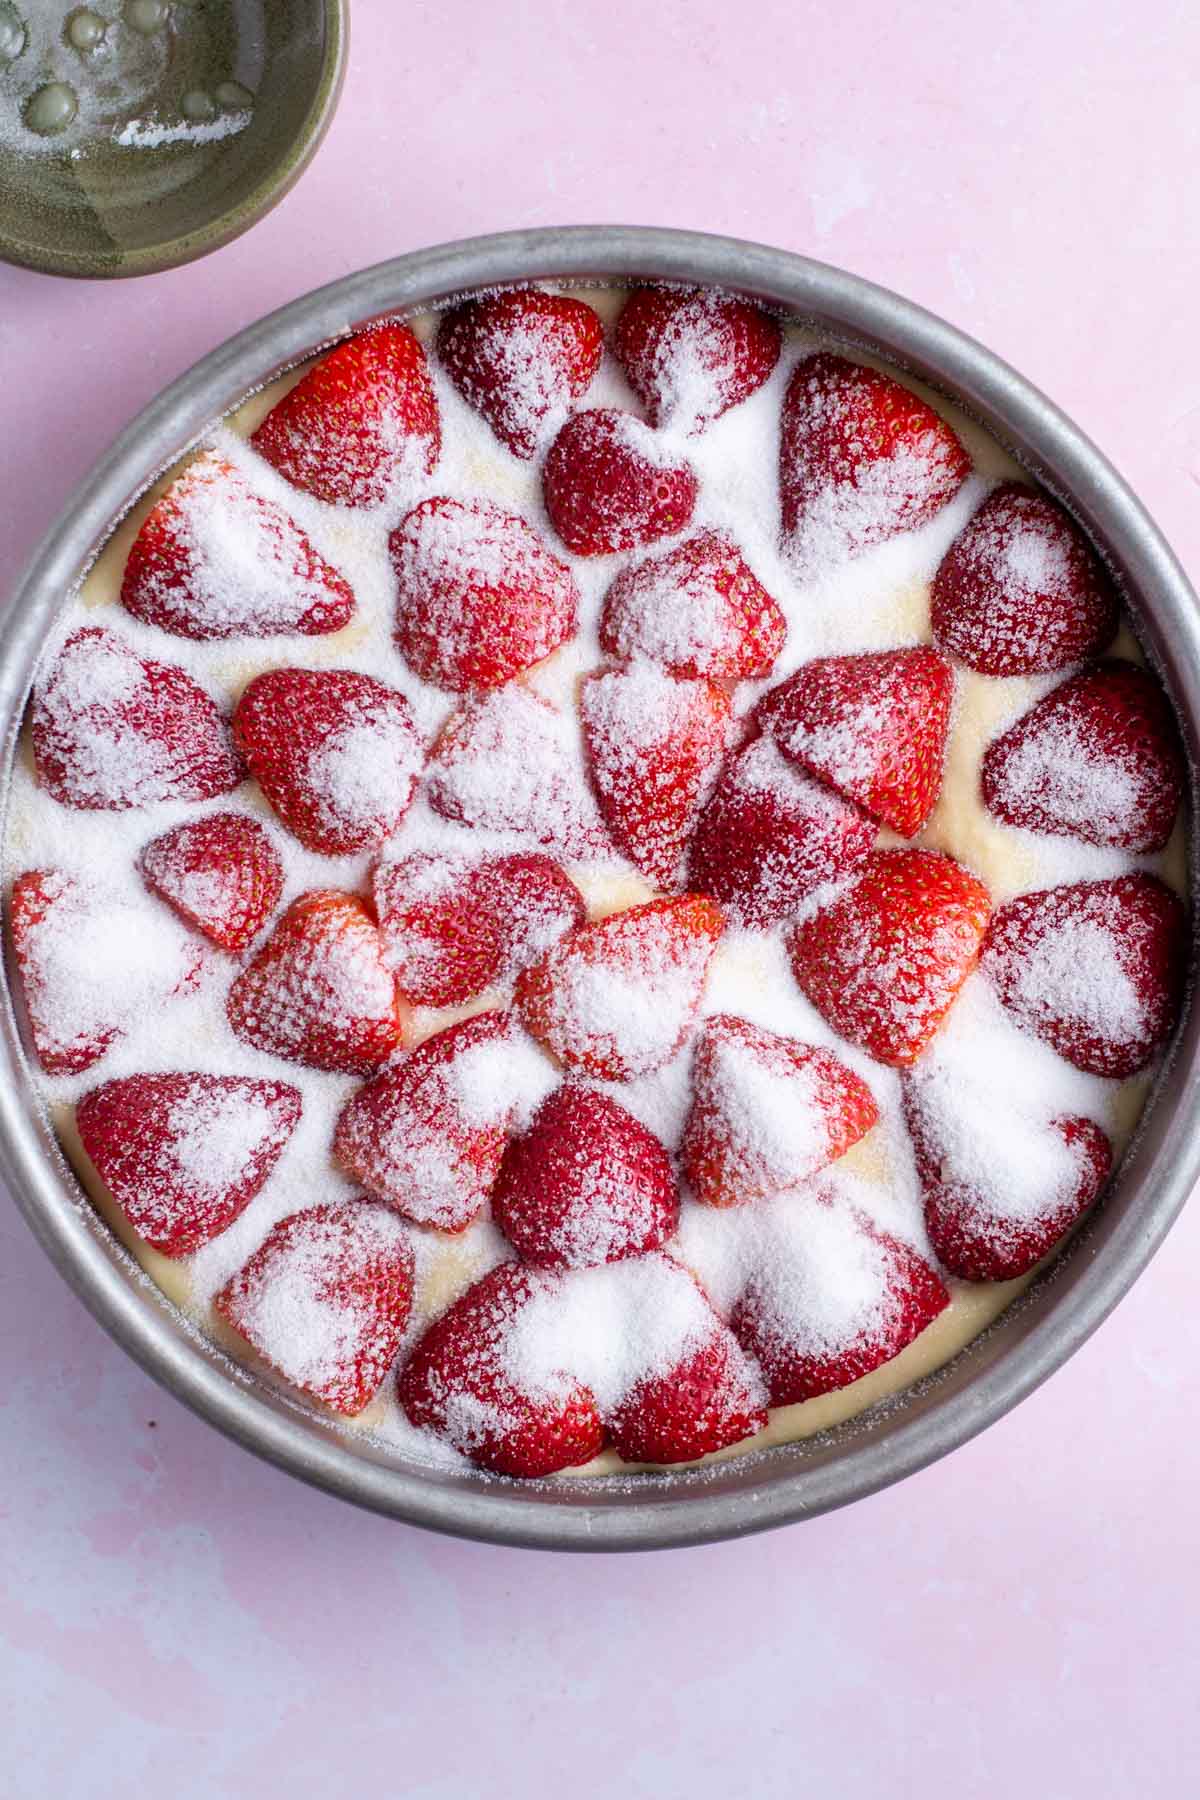 granulated sugar sprinkled over the strawberry topping